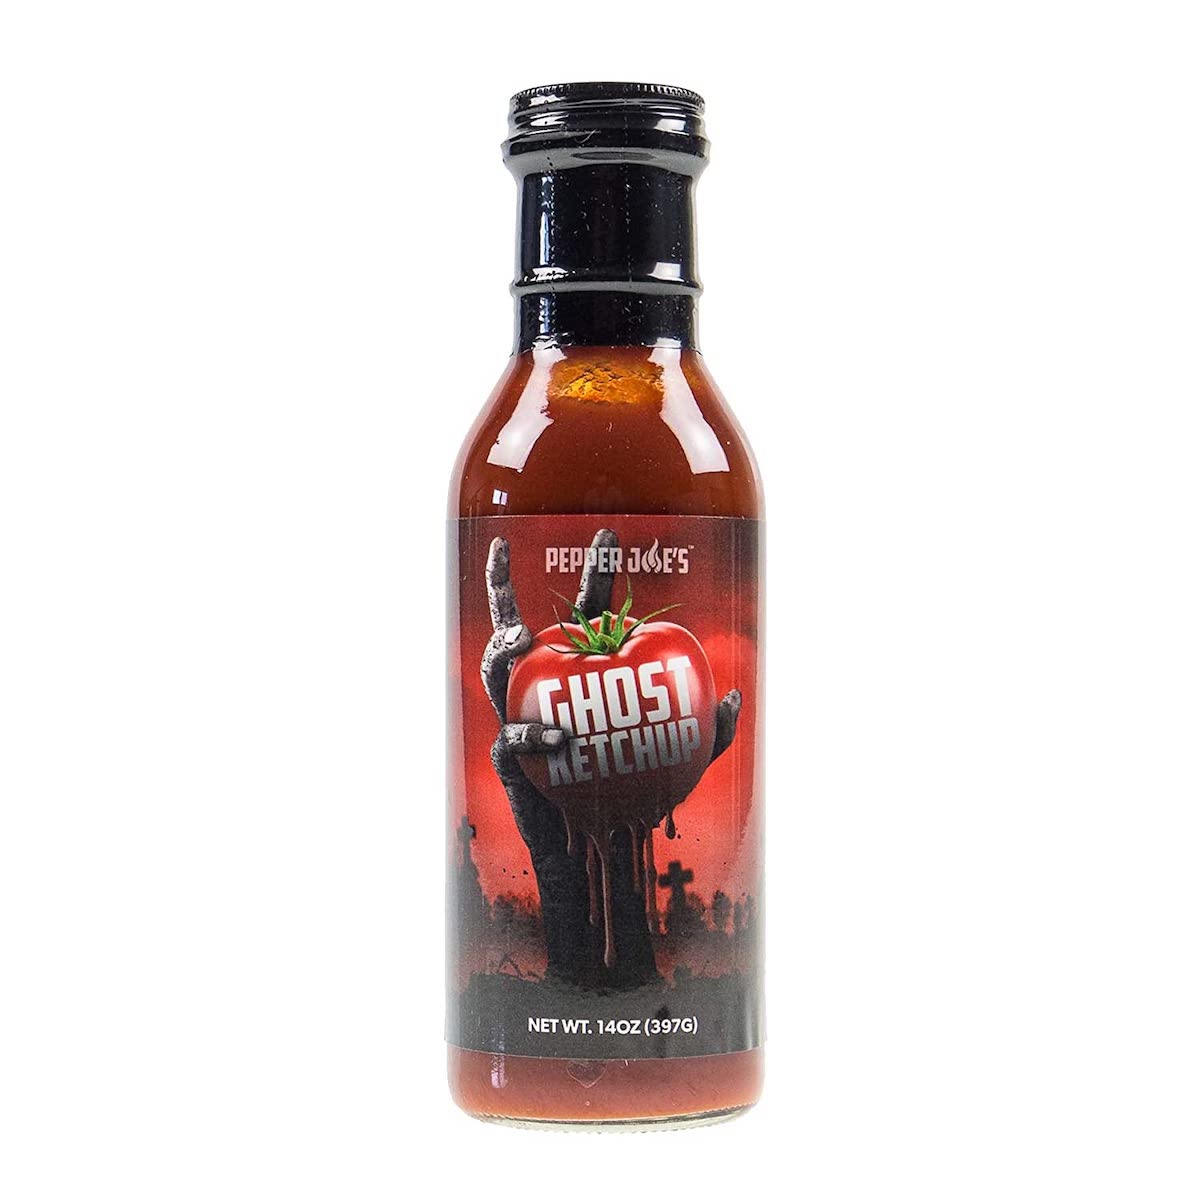 Pepper Joe's Ghost Pepper Ketchup - spicy ketchup on white background